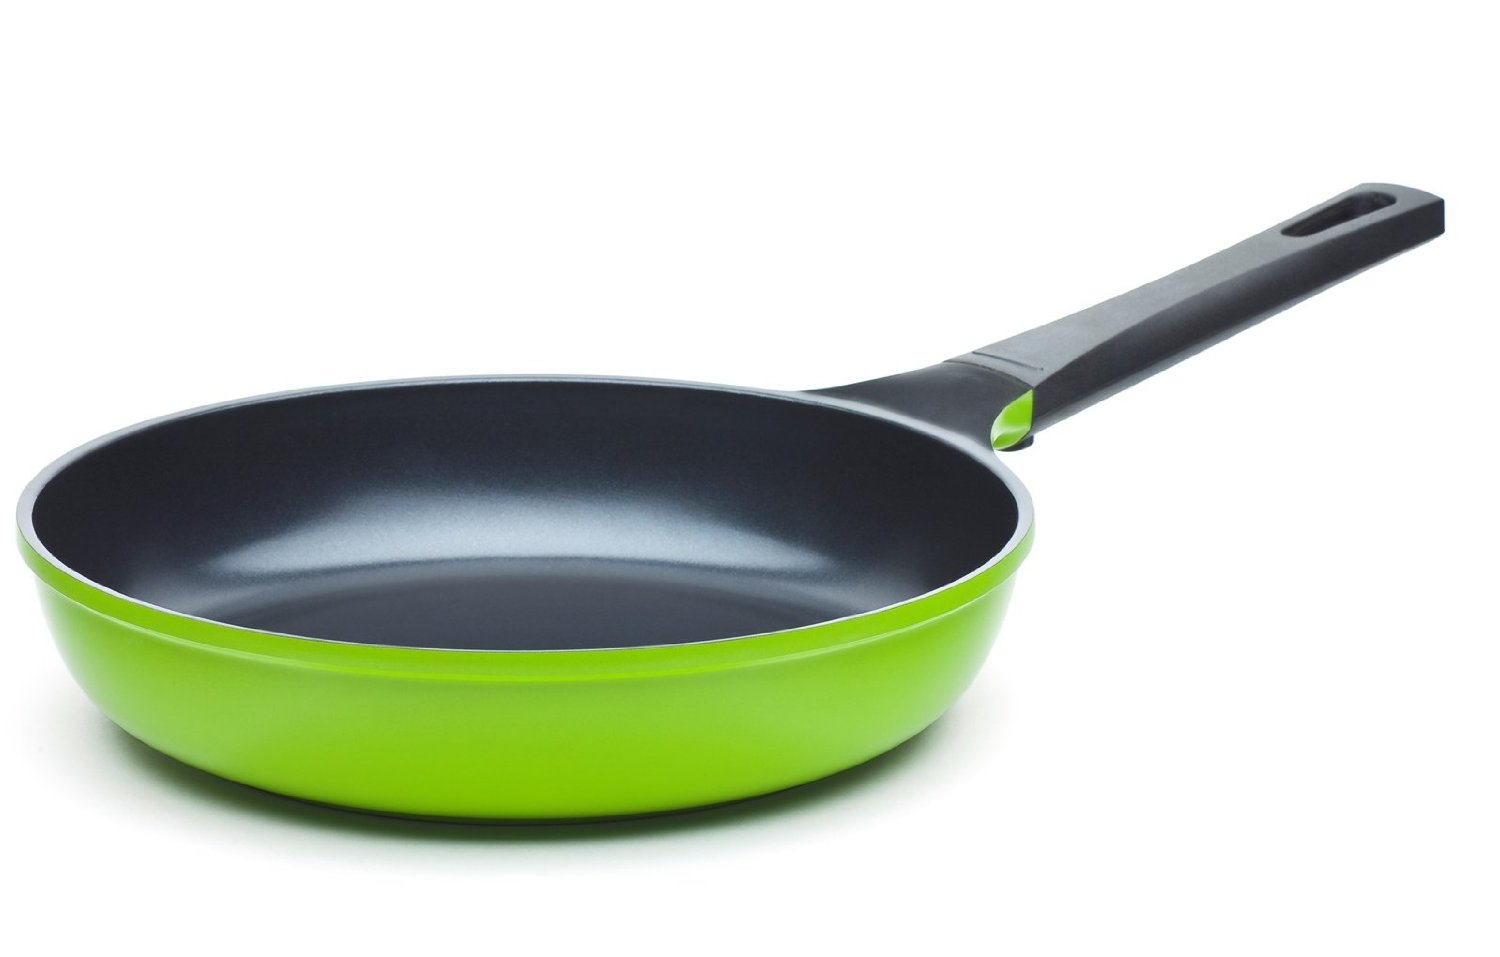 Amazon.com: The 10" Green Earth Frying Pan by Ozeri, with Smooth ...